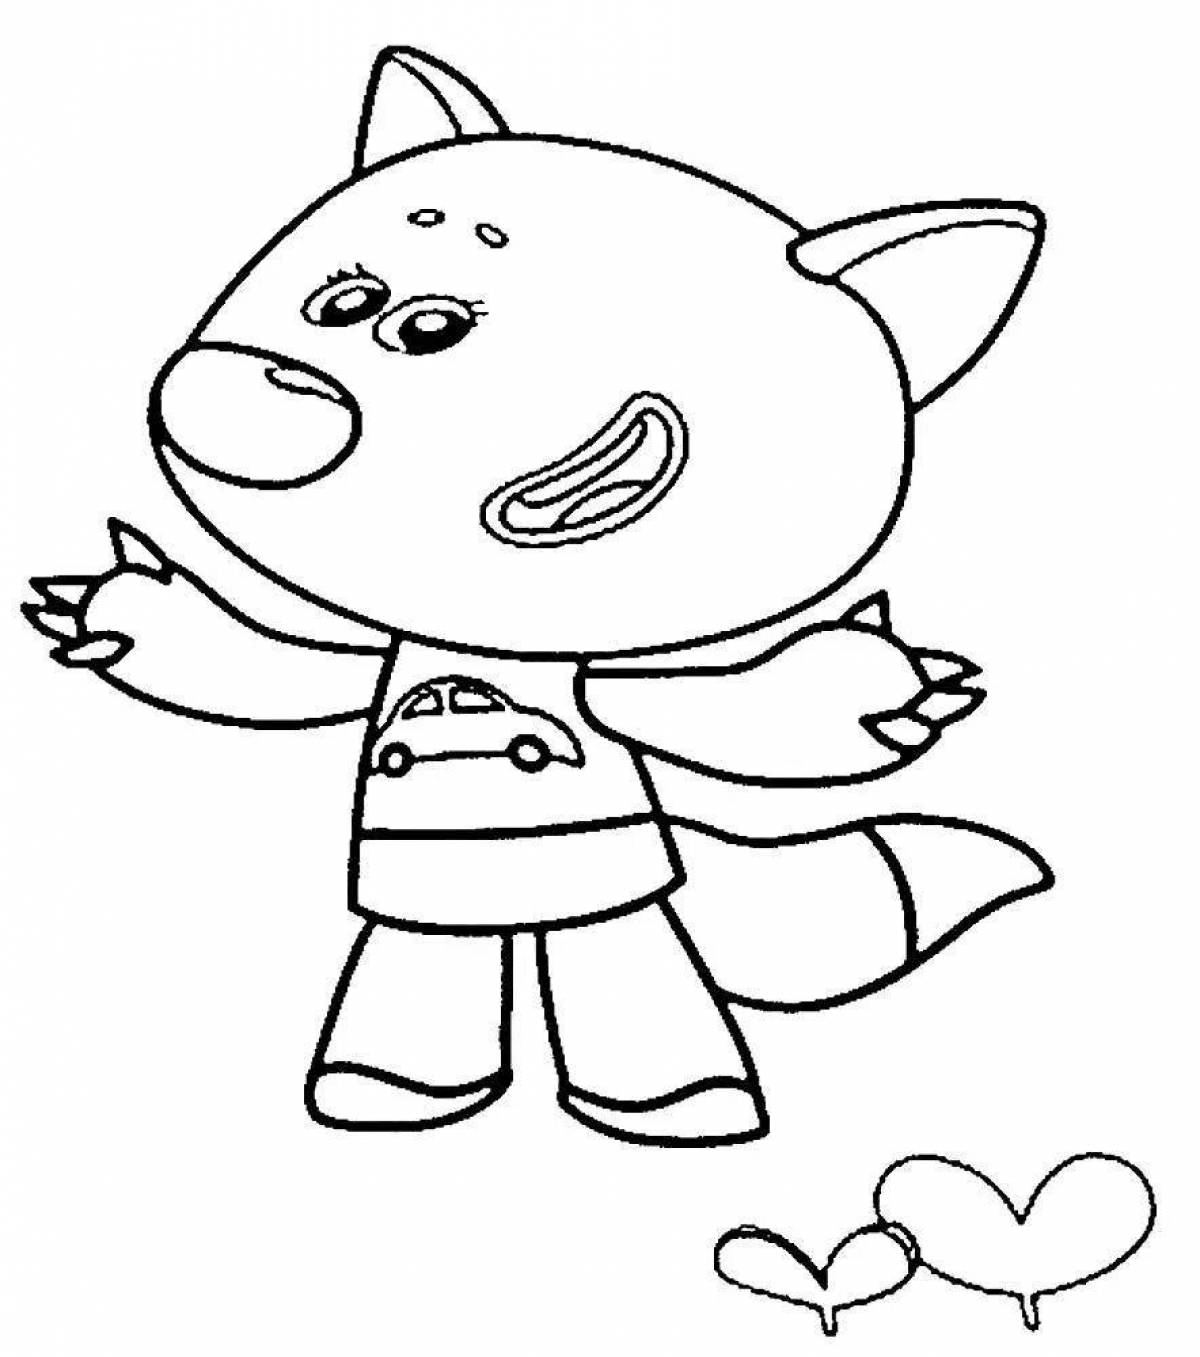 Fun cartoon coloring pages